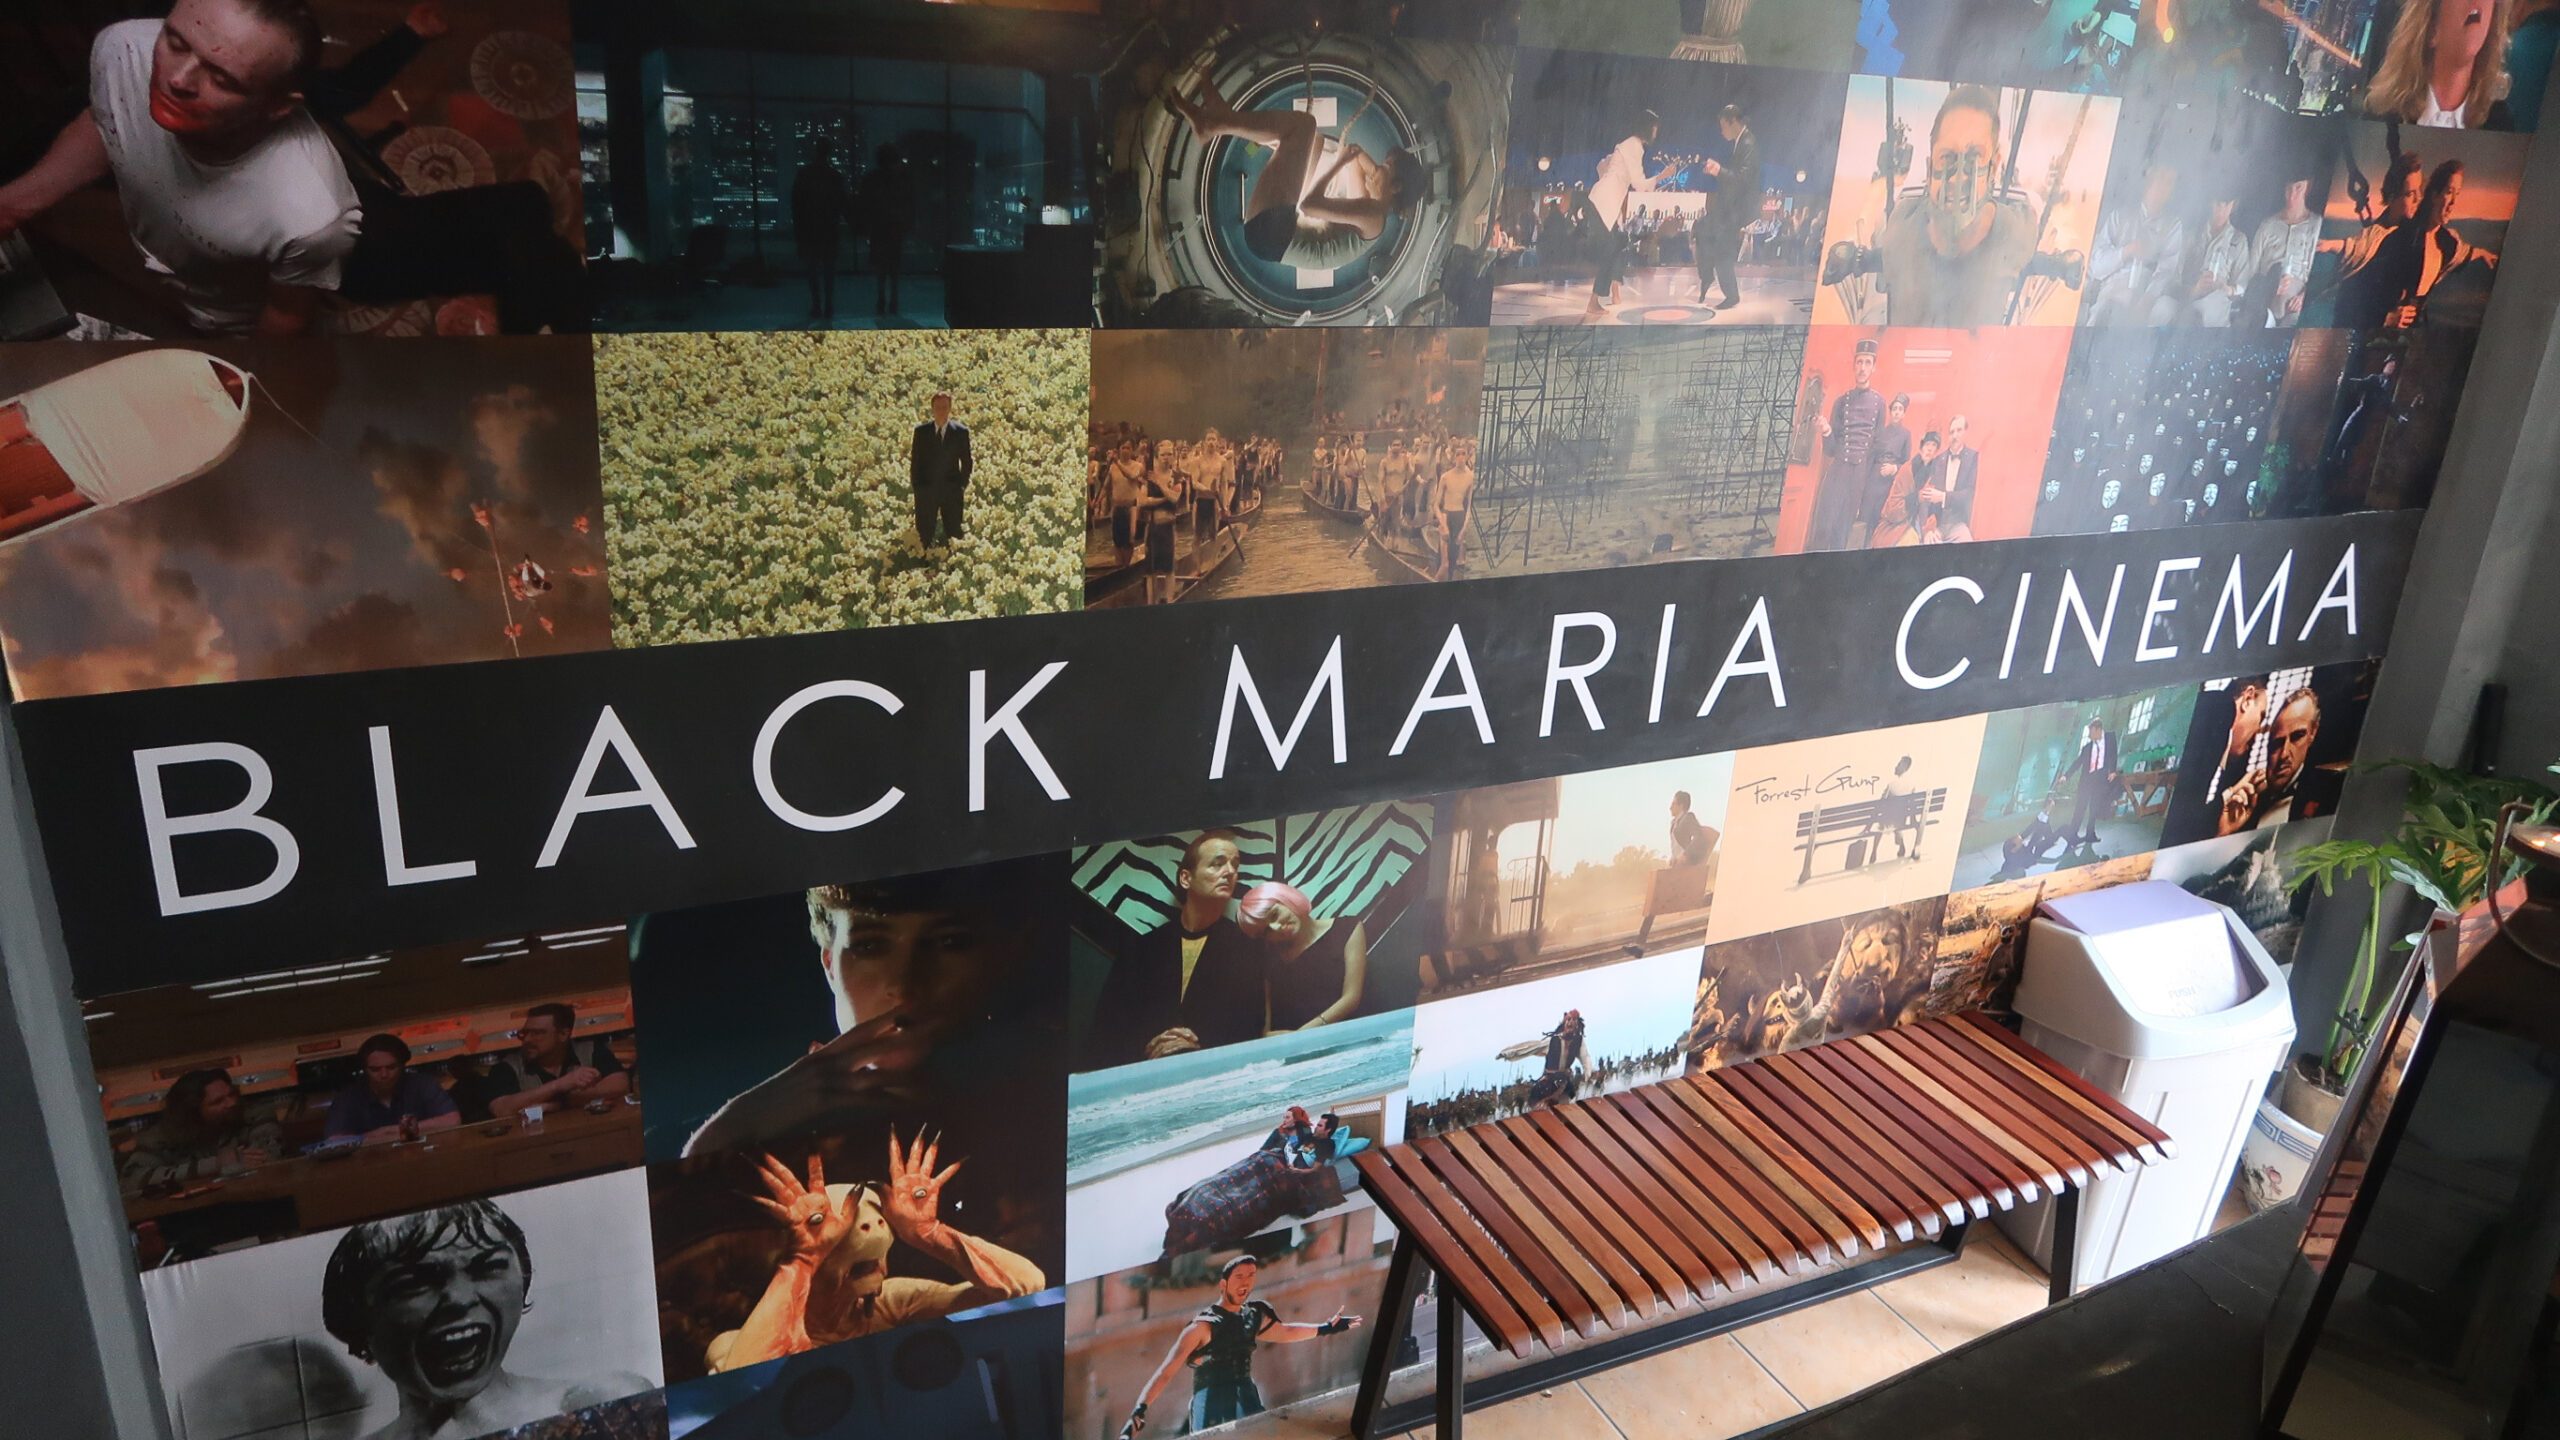 Black Maria Cinema: The tiny theater screening your favorite indie films